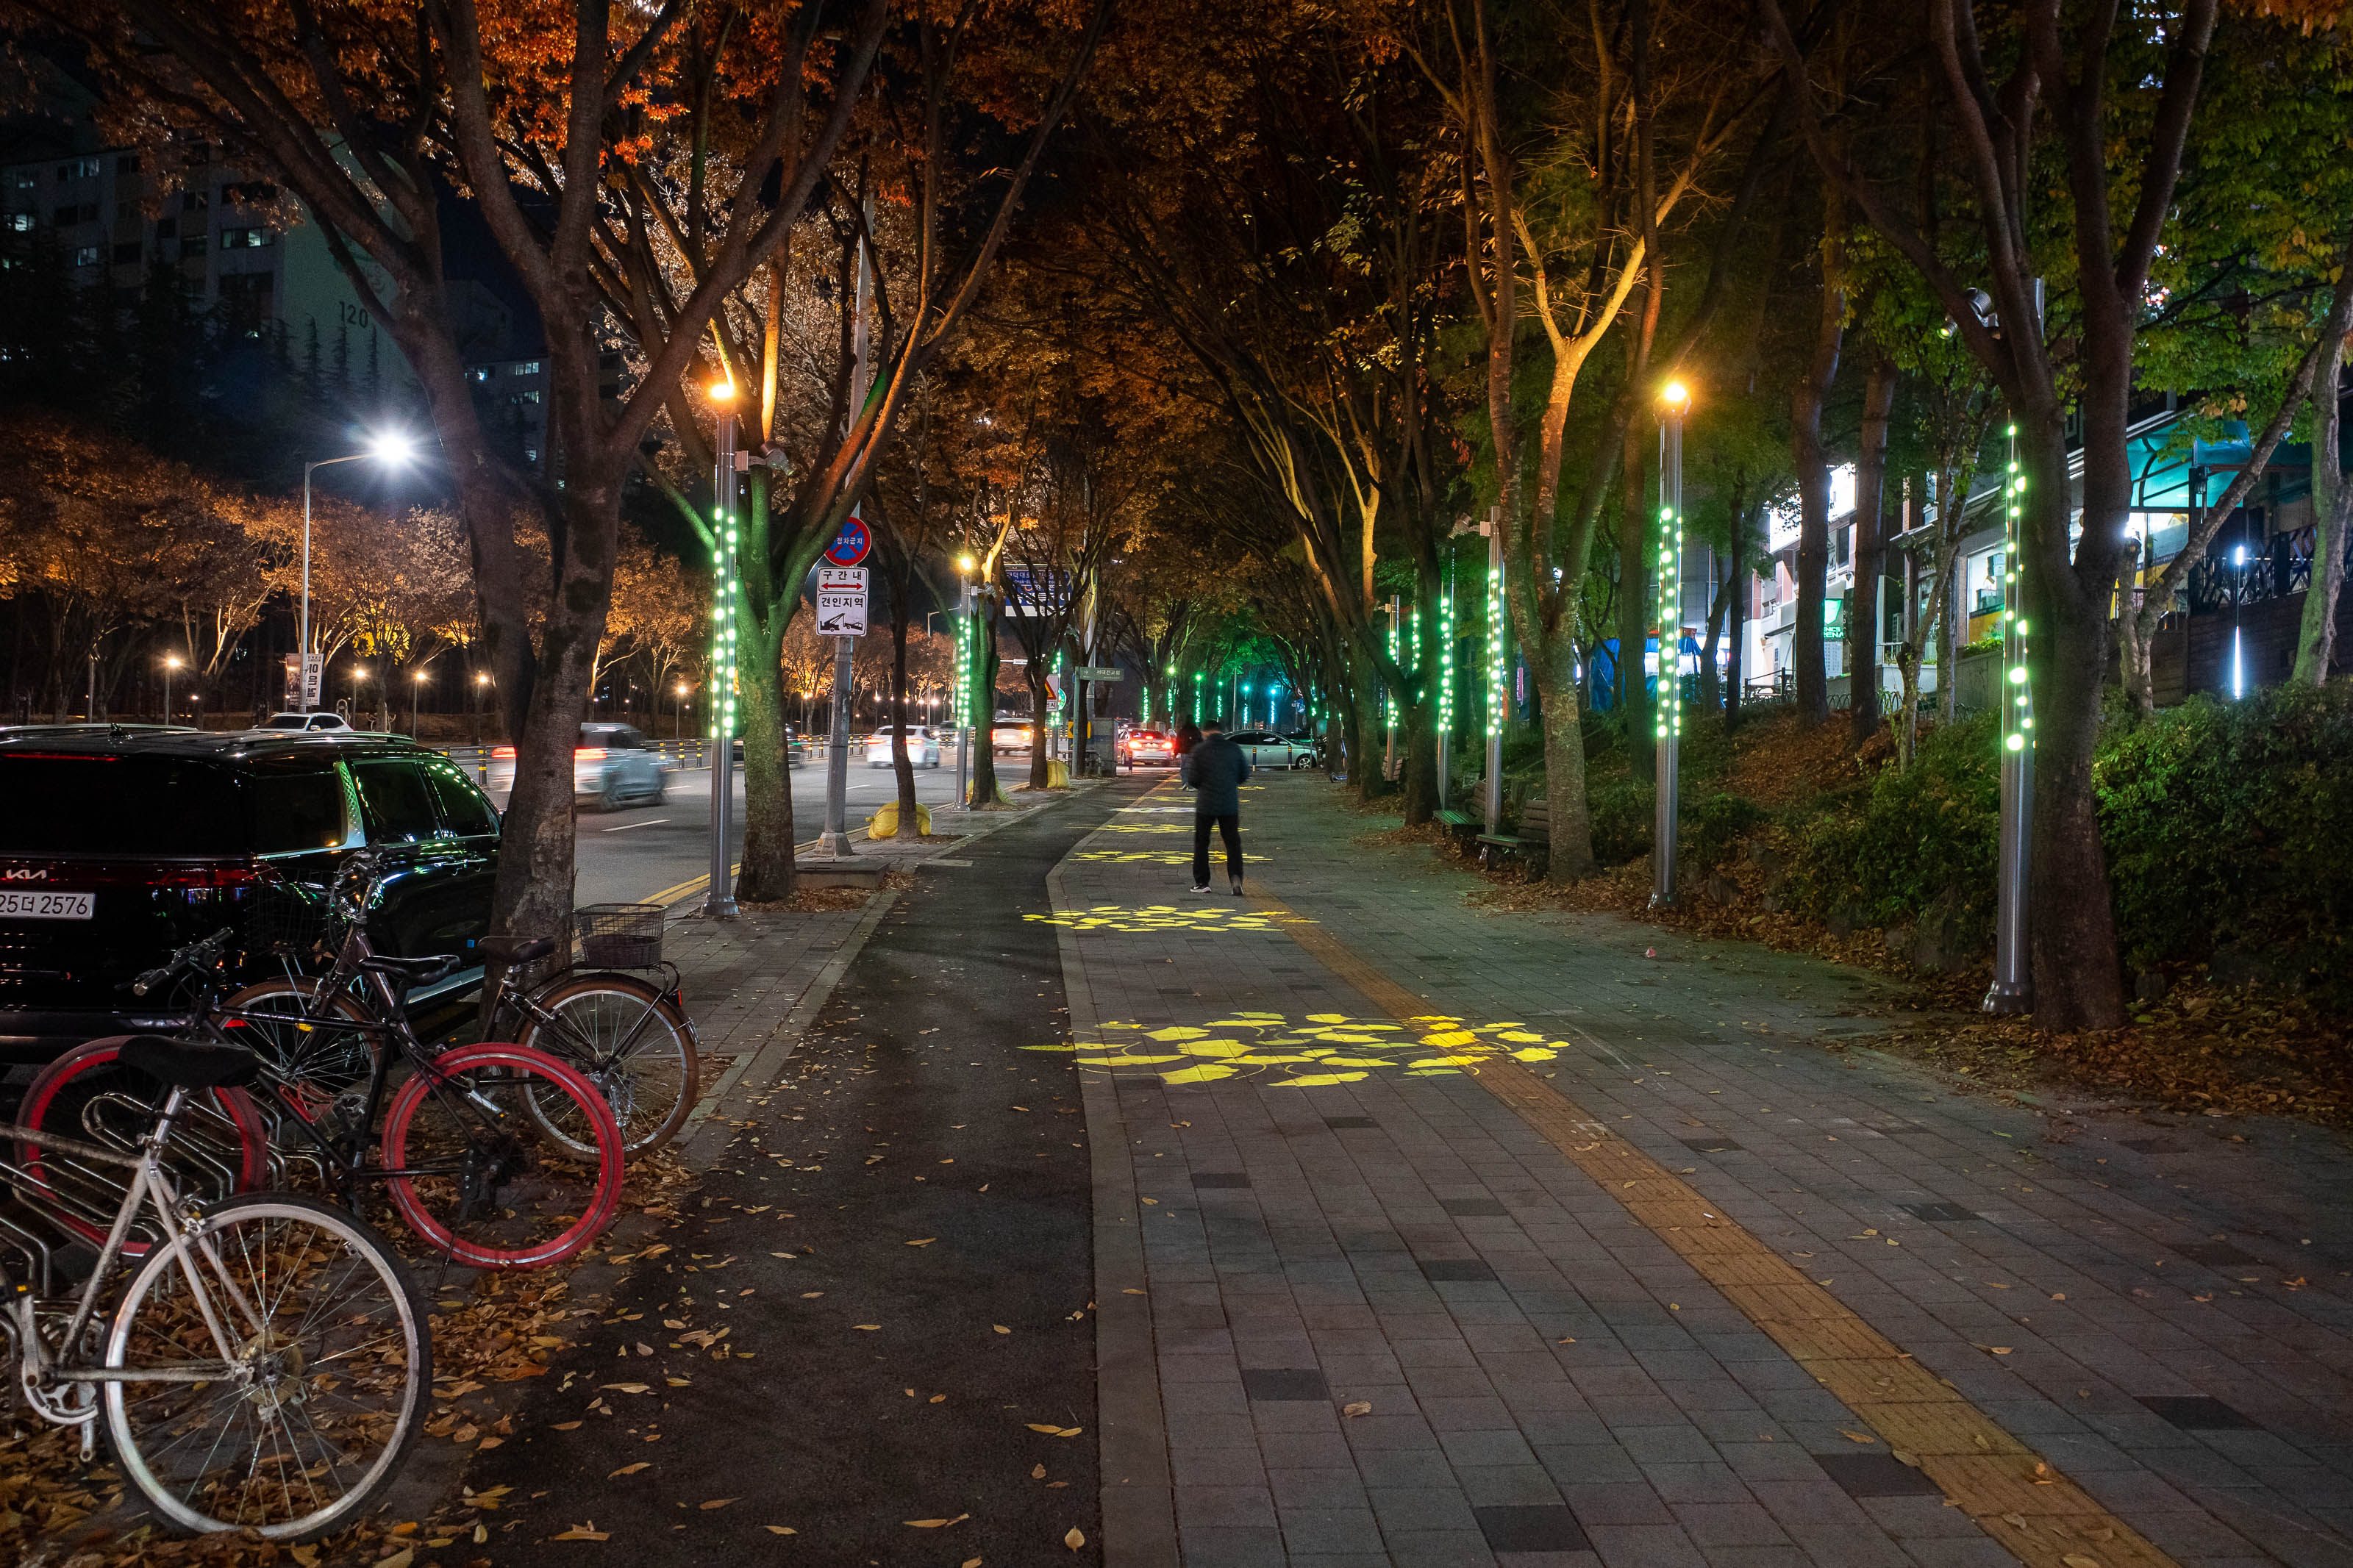 Korea-Daejeon-Dunsan - Final pic for this evening, I wandered away from the city centre and enjoyed the tree lighting with lasers that lined most streets.